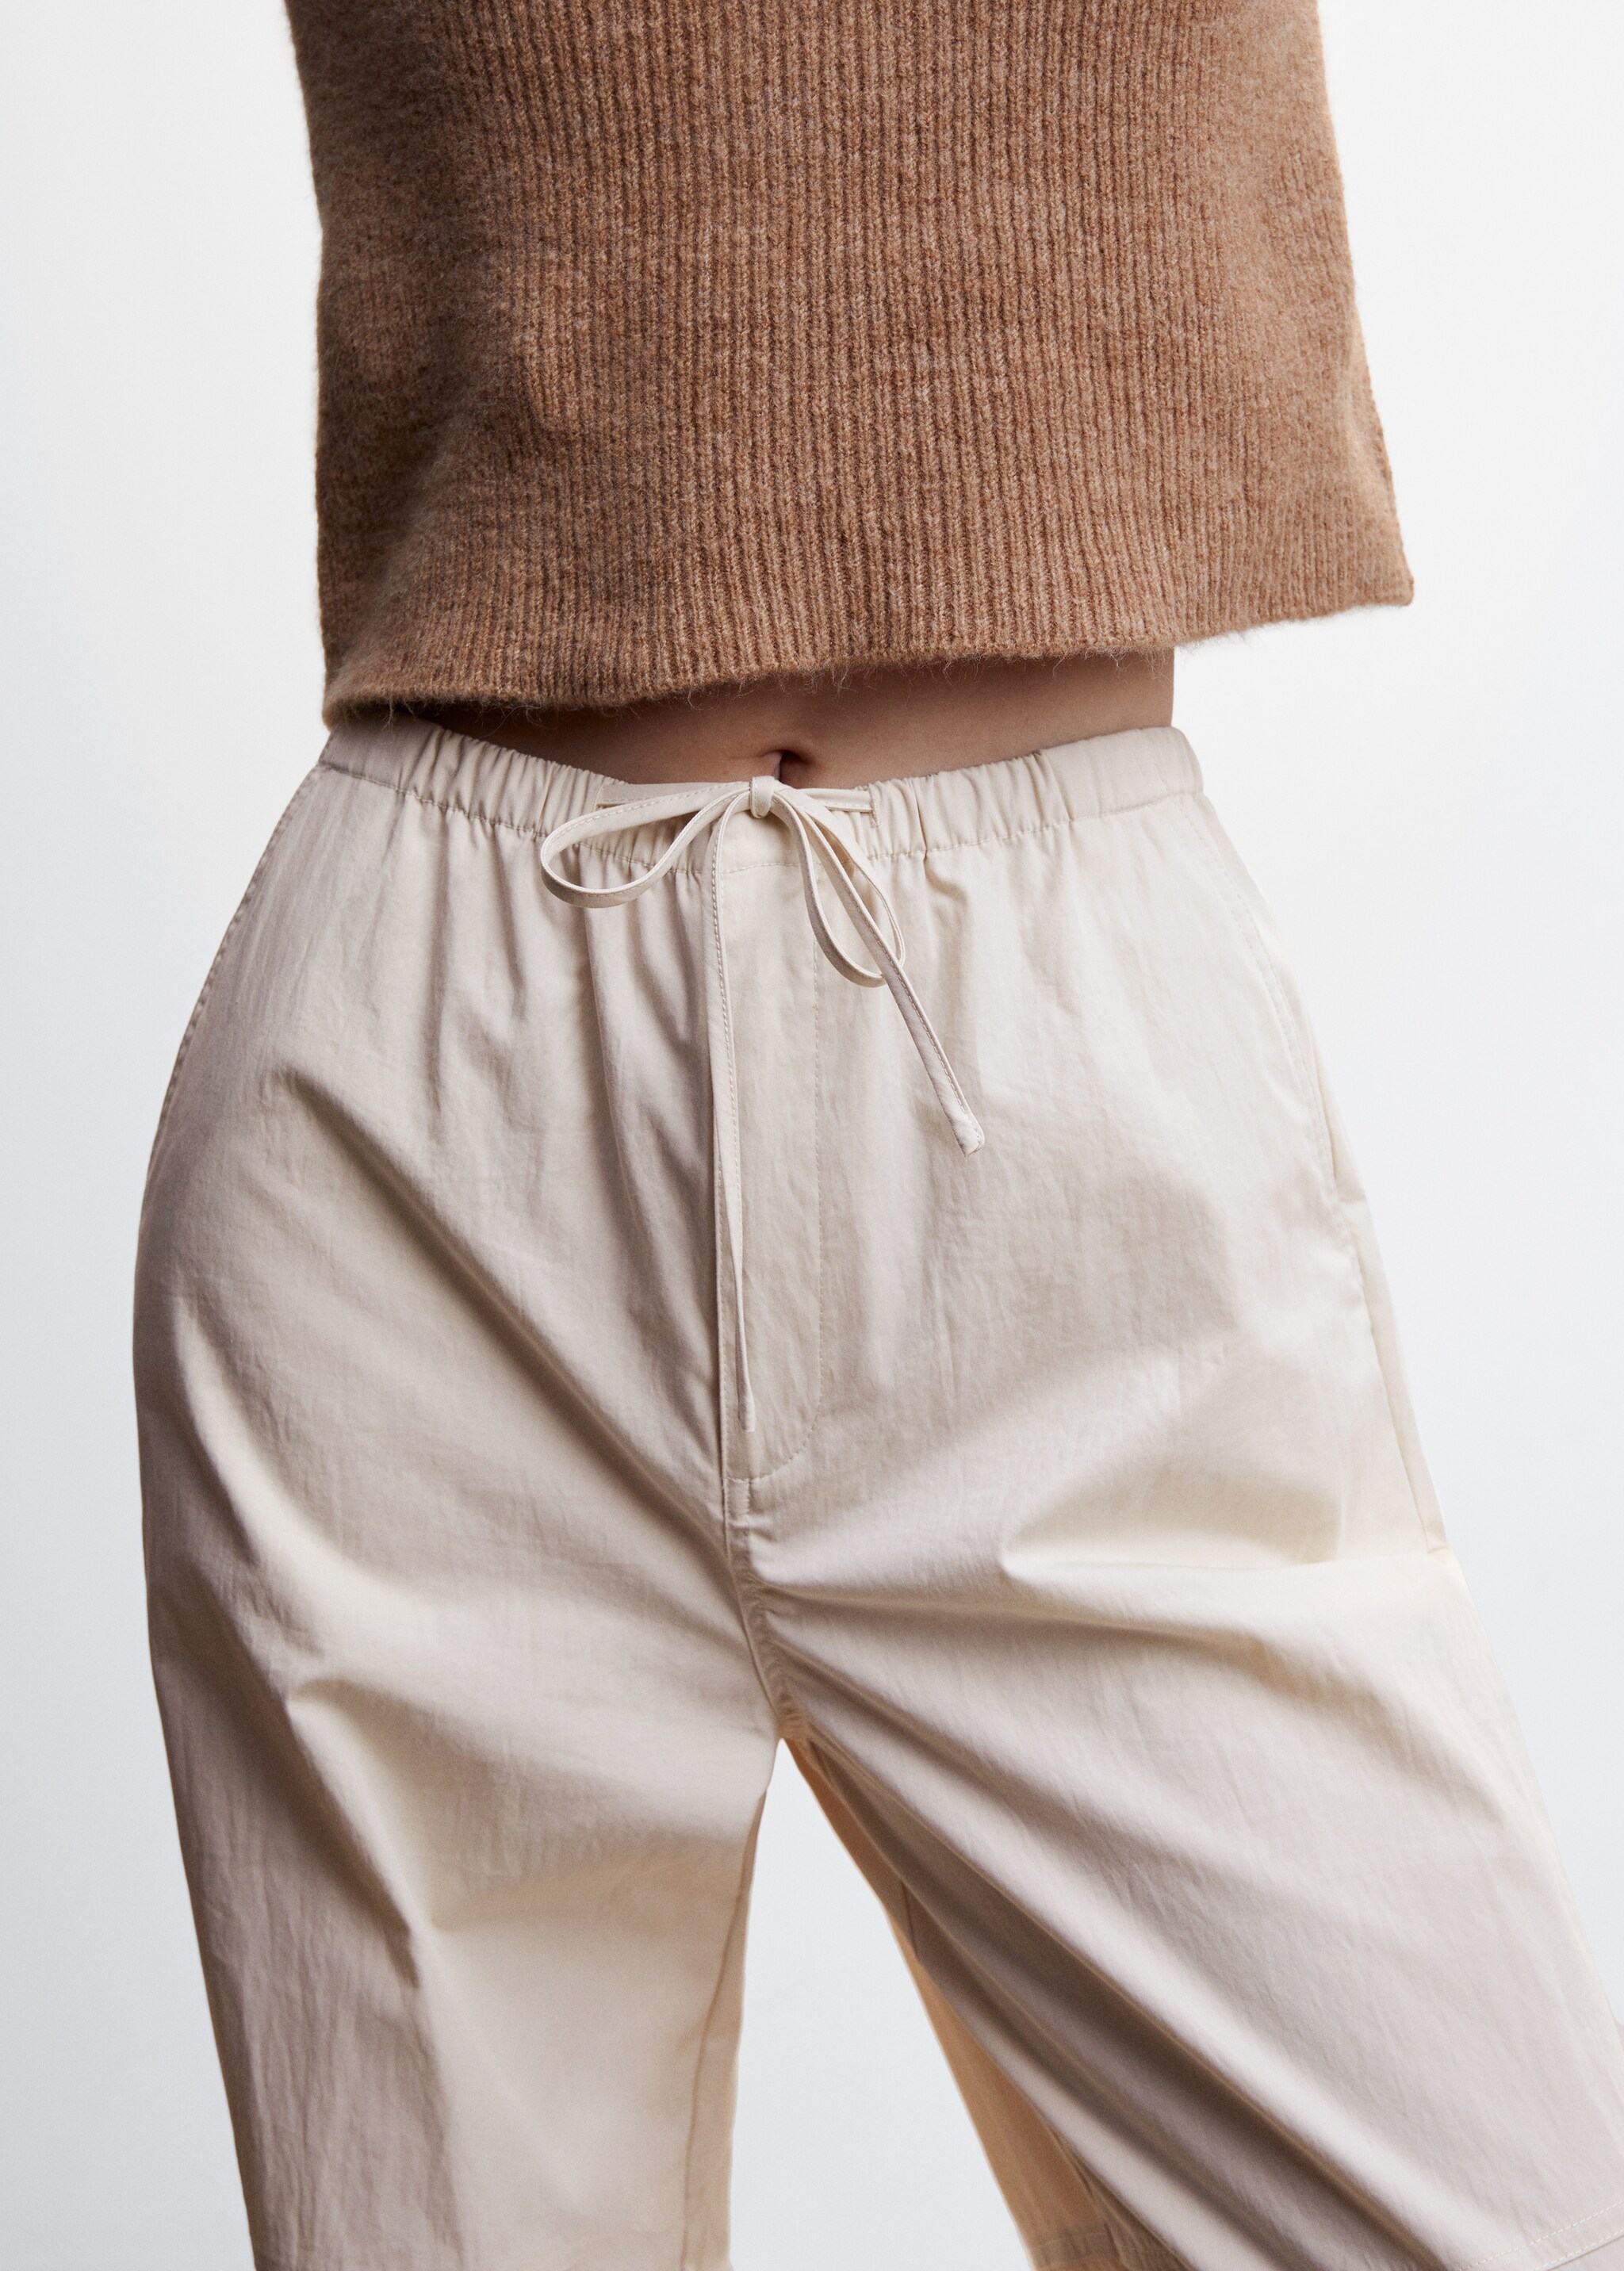 Parachute trousers - Details of the article 6